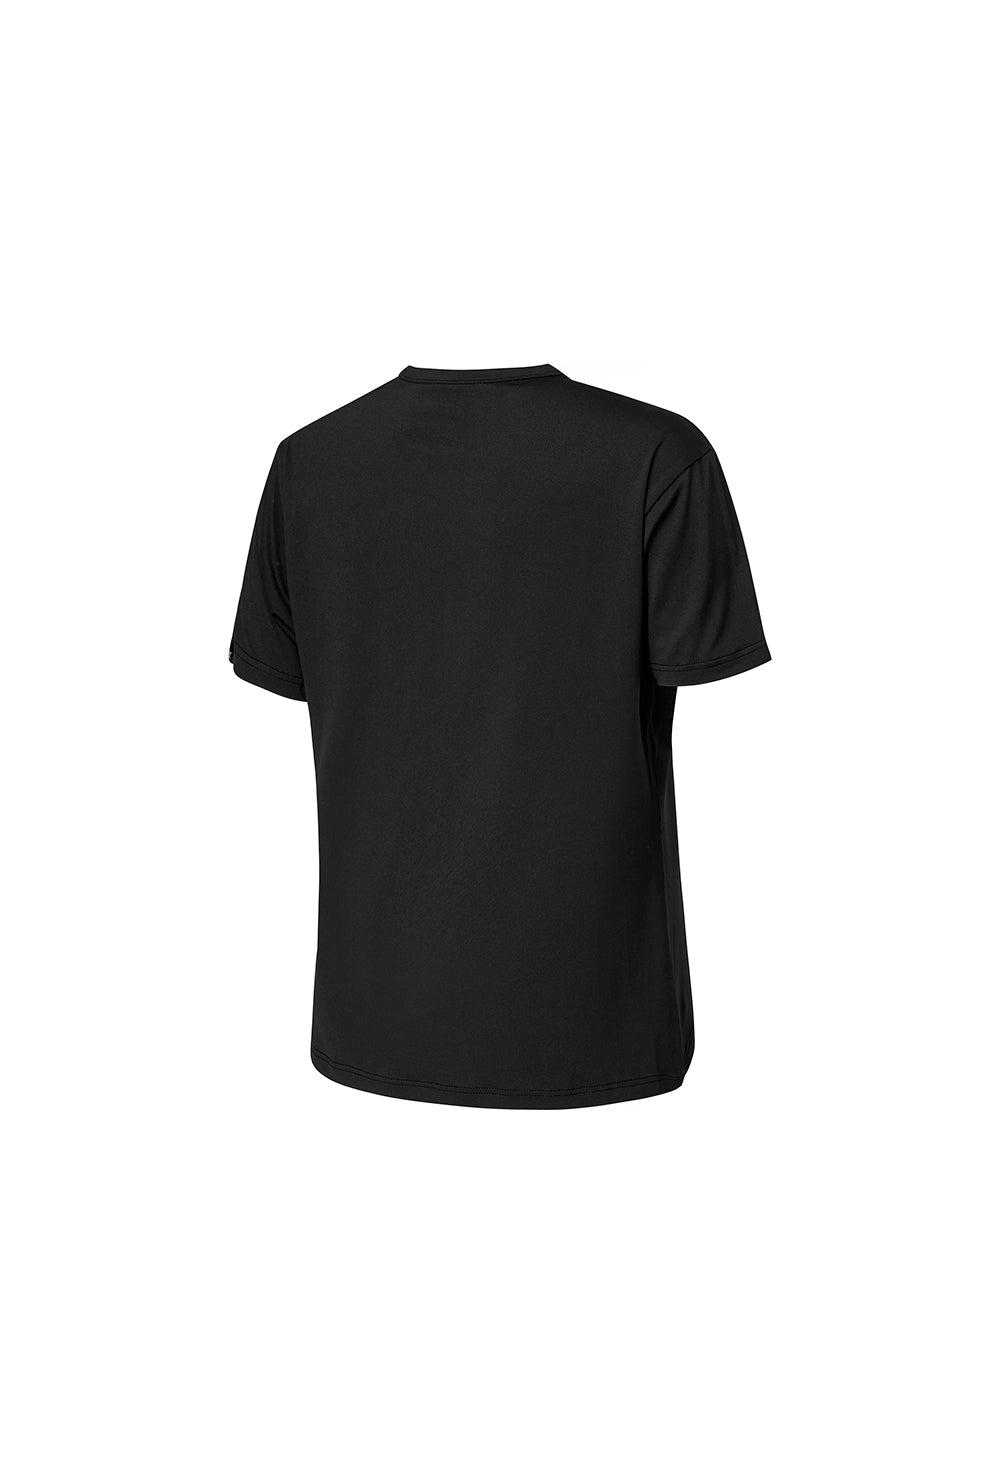 Men's Ice Feather Muscle Fit Short Sleeve - Black